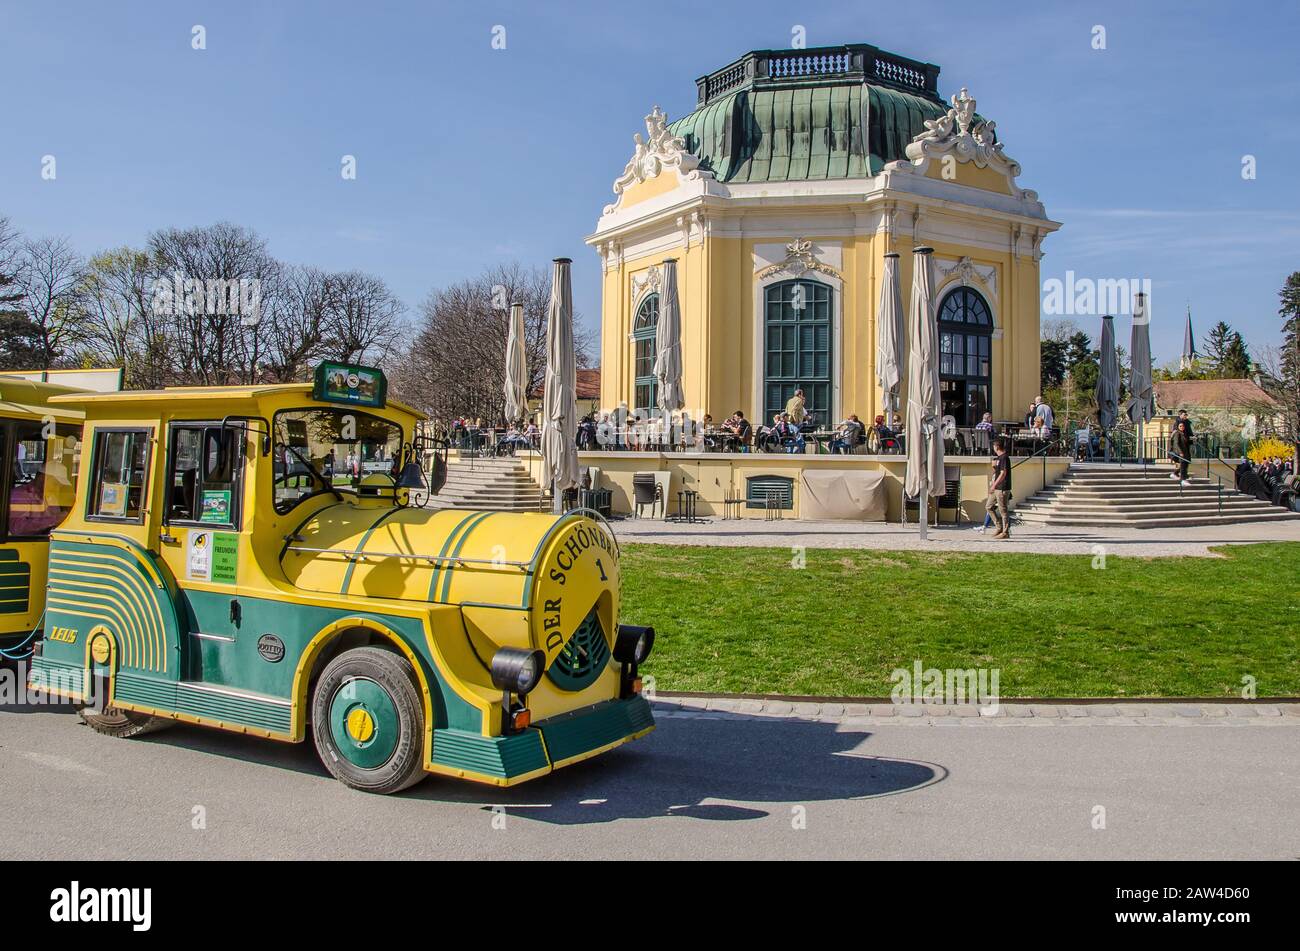 Tiergarten Schönbrunn or 'Vienna Zoo, founded as an imperial menagerie in 1752, is the oldest continuously operating zoo in the world. Stock Photo